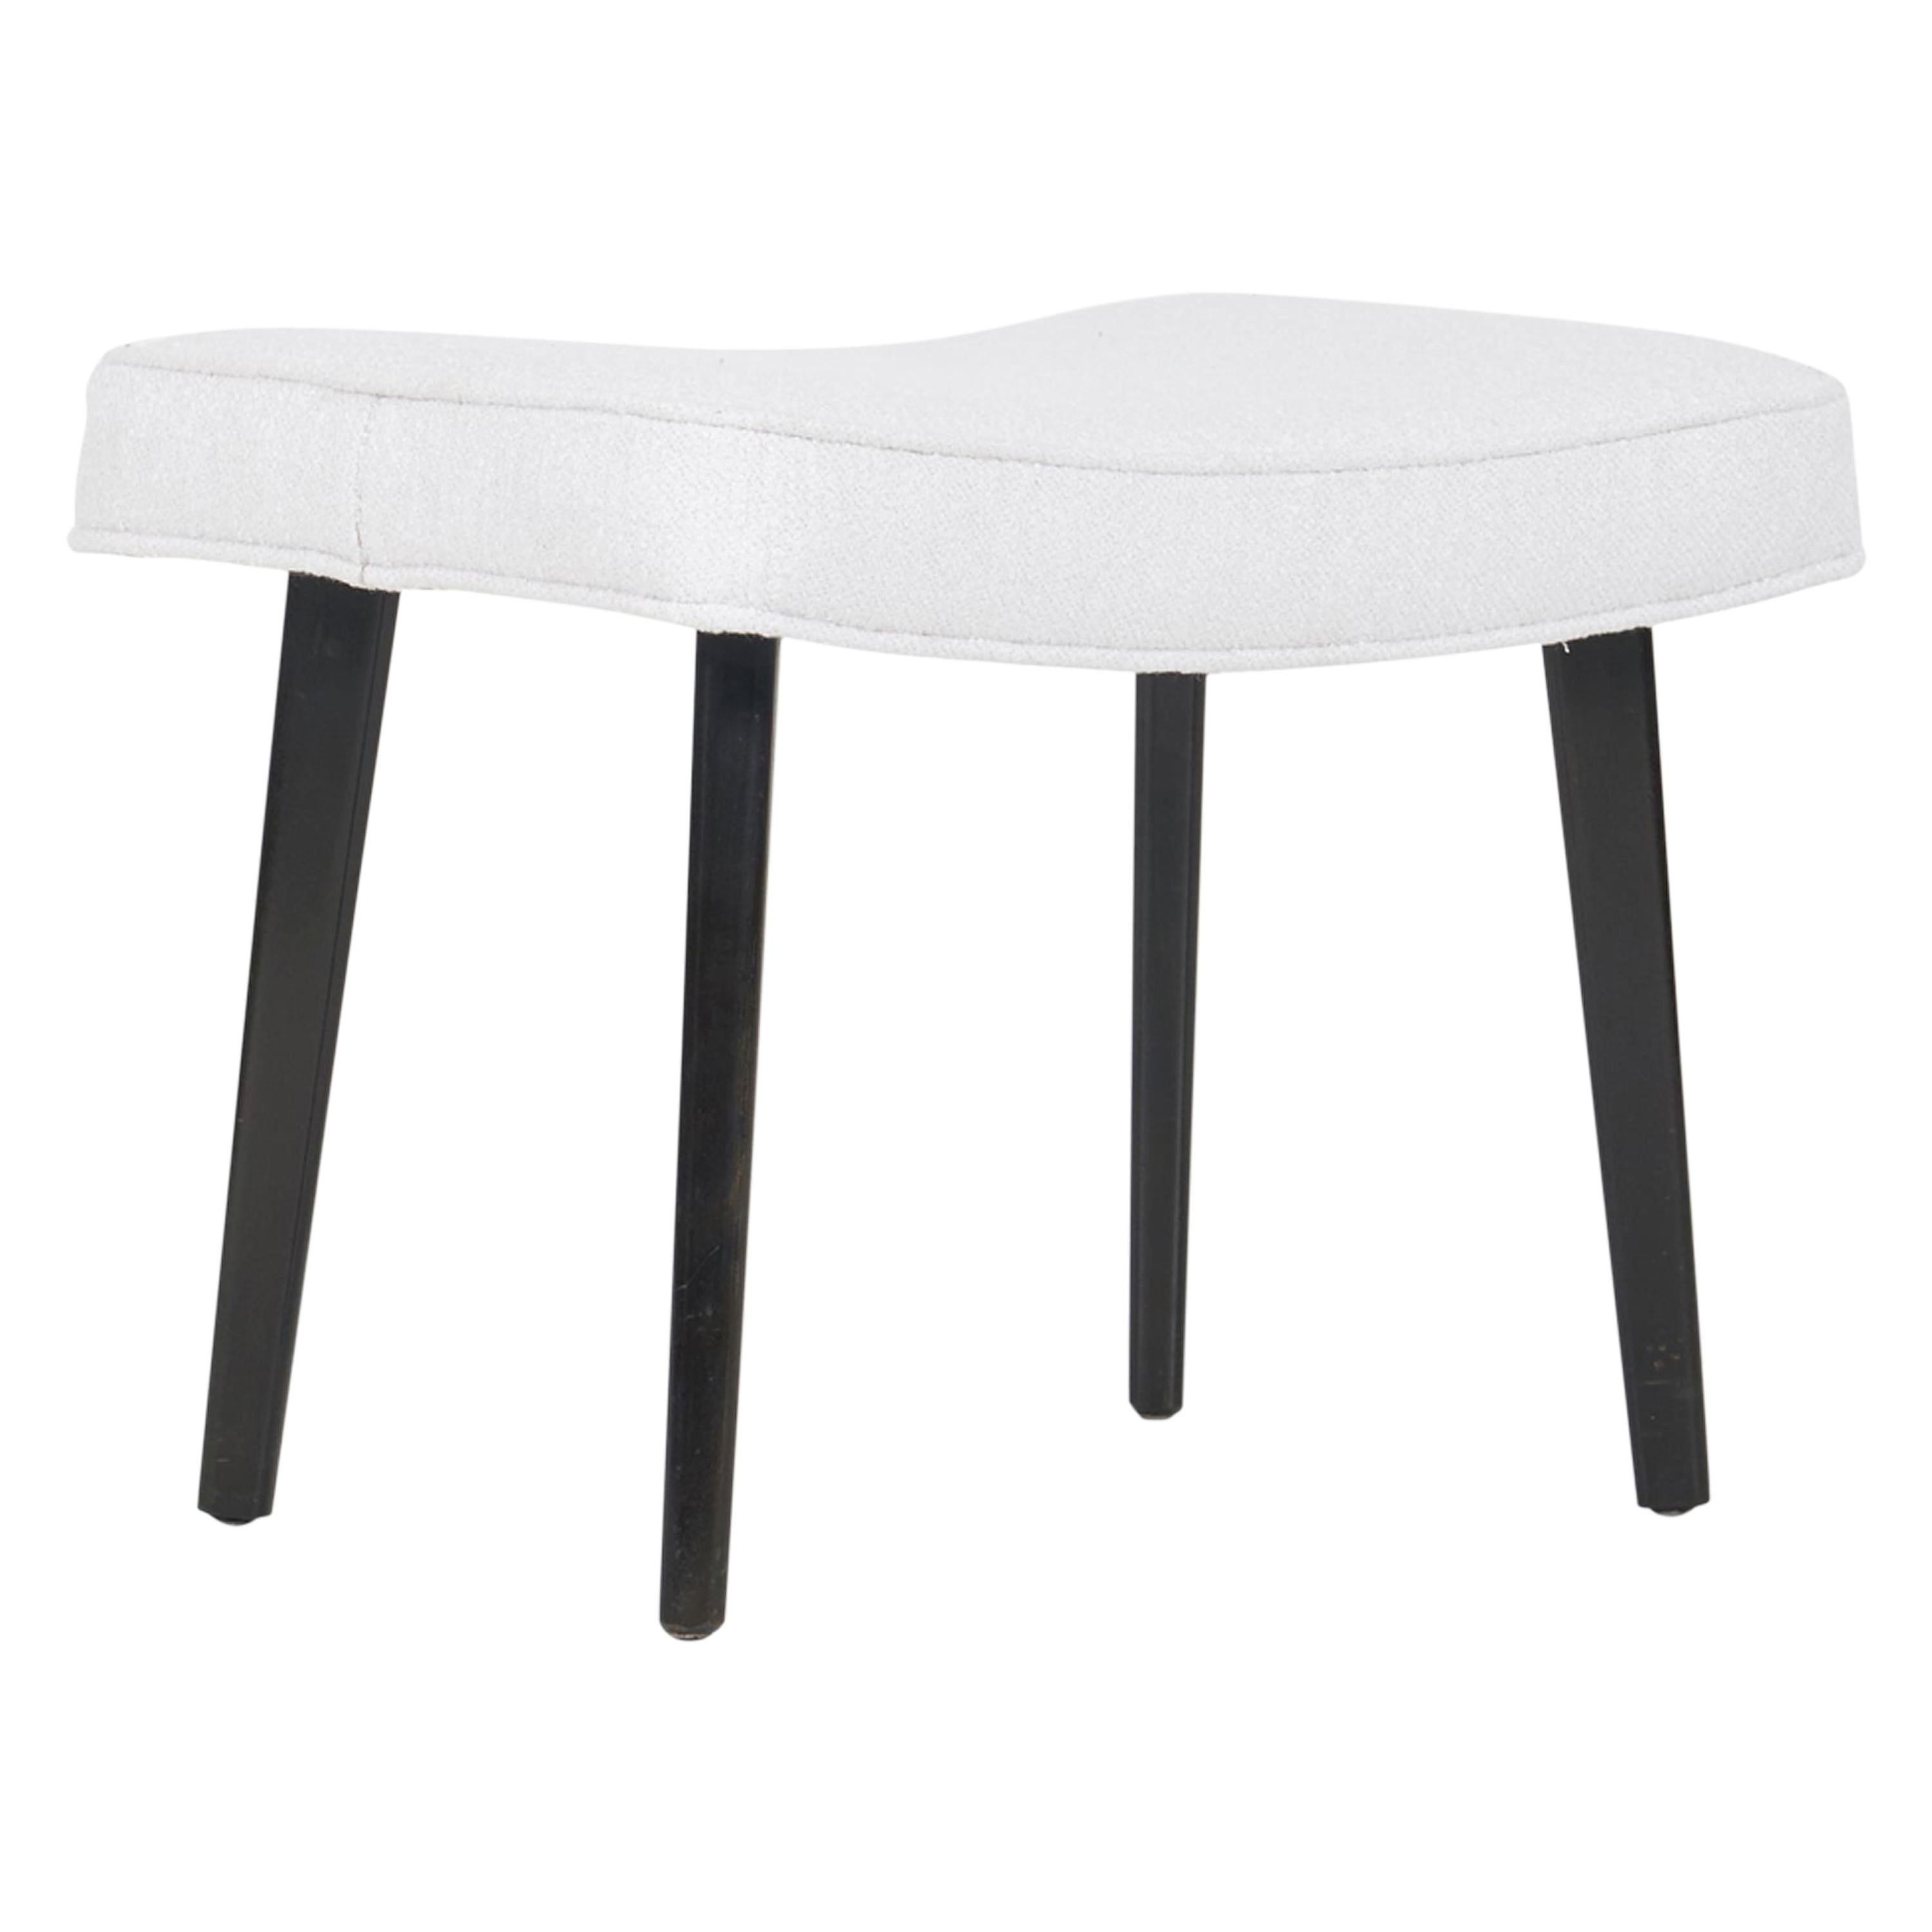 George Nelson Bench or Stool For Sale